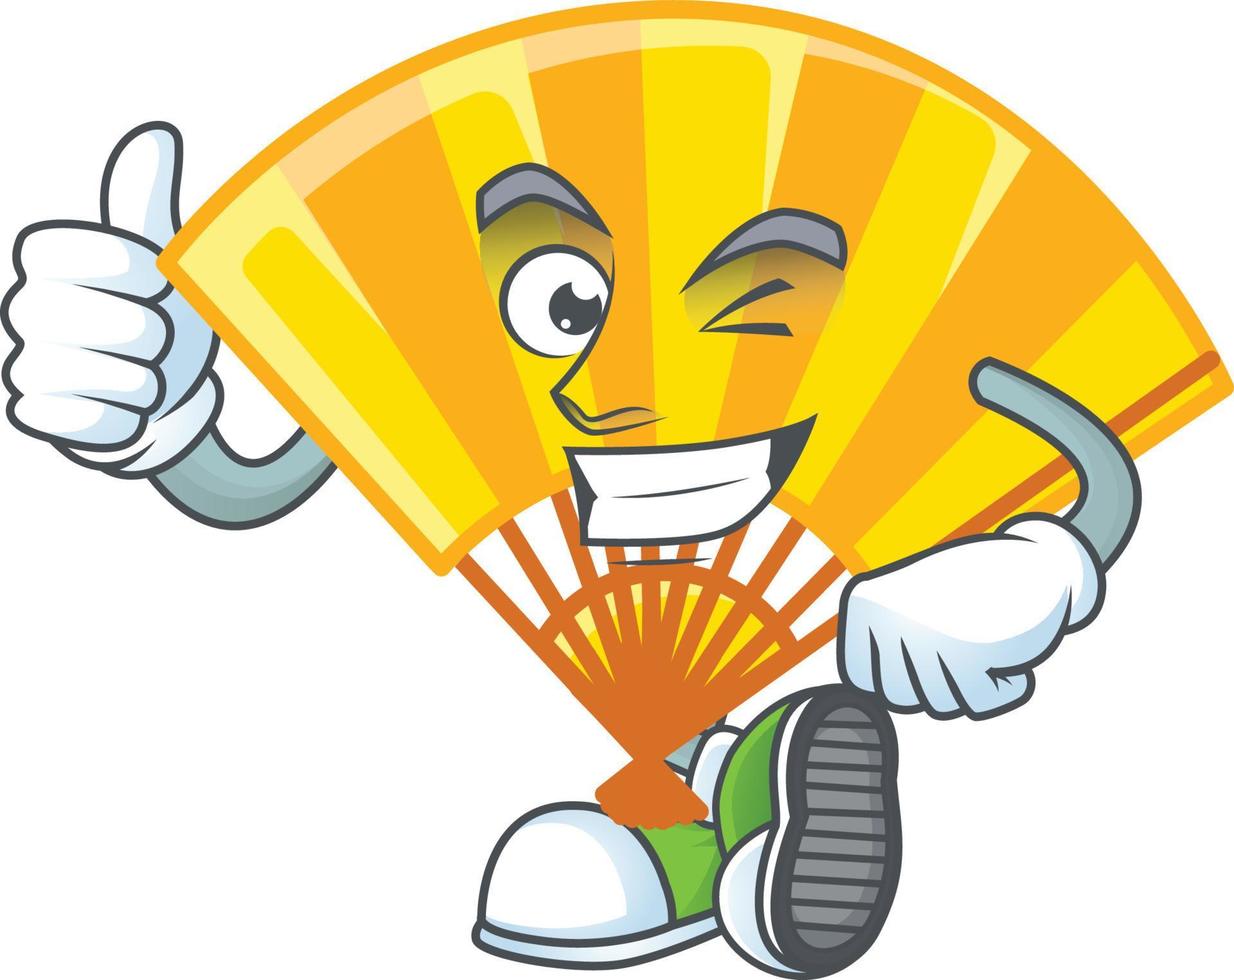 Gold chinese folding fan cartoon character style vector